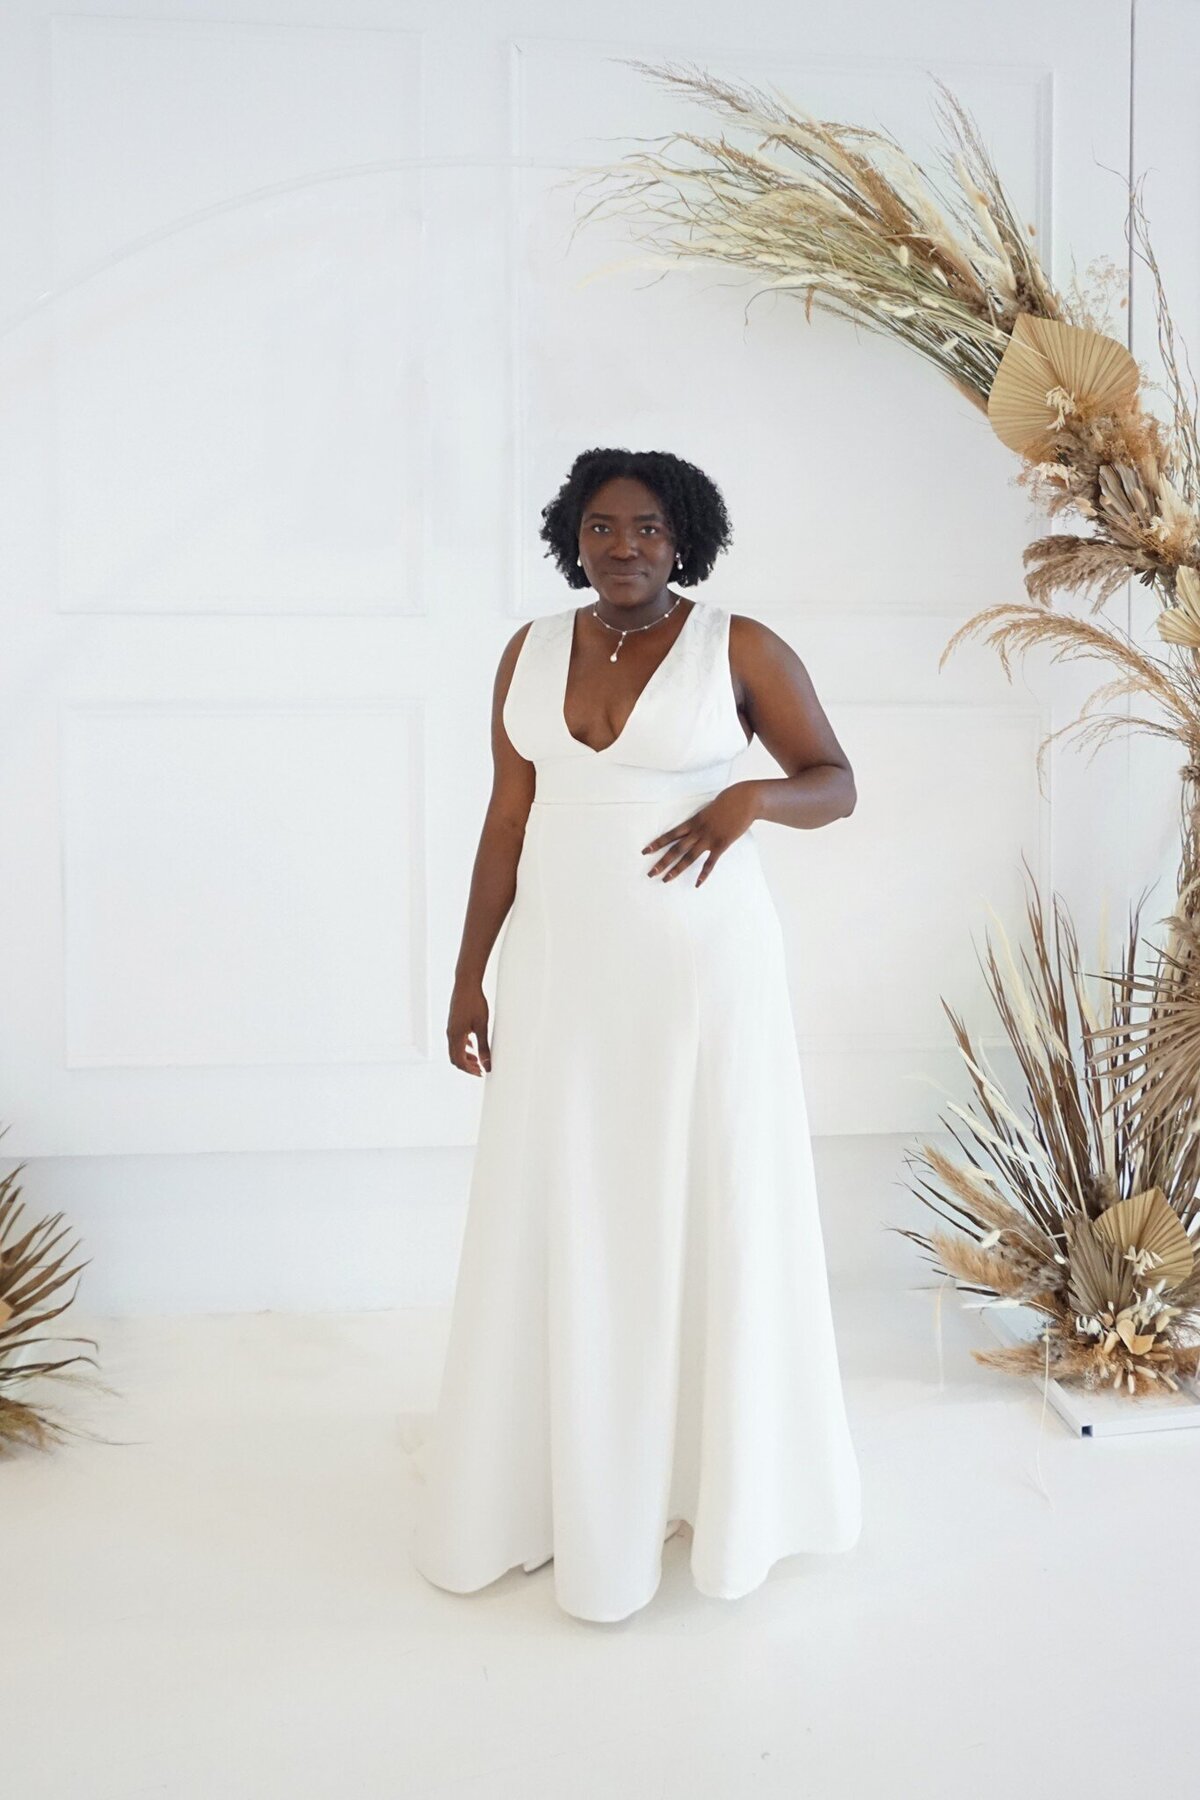 Black model in the Sol wedding dress, which features a modified a-line skirt and a v-neck bodice in a floral crepe fabric.